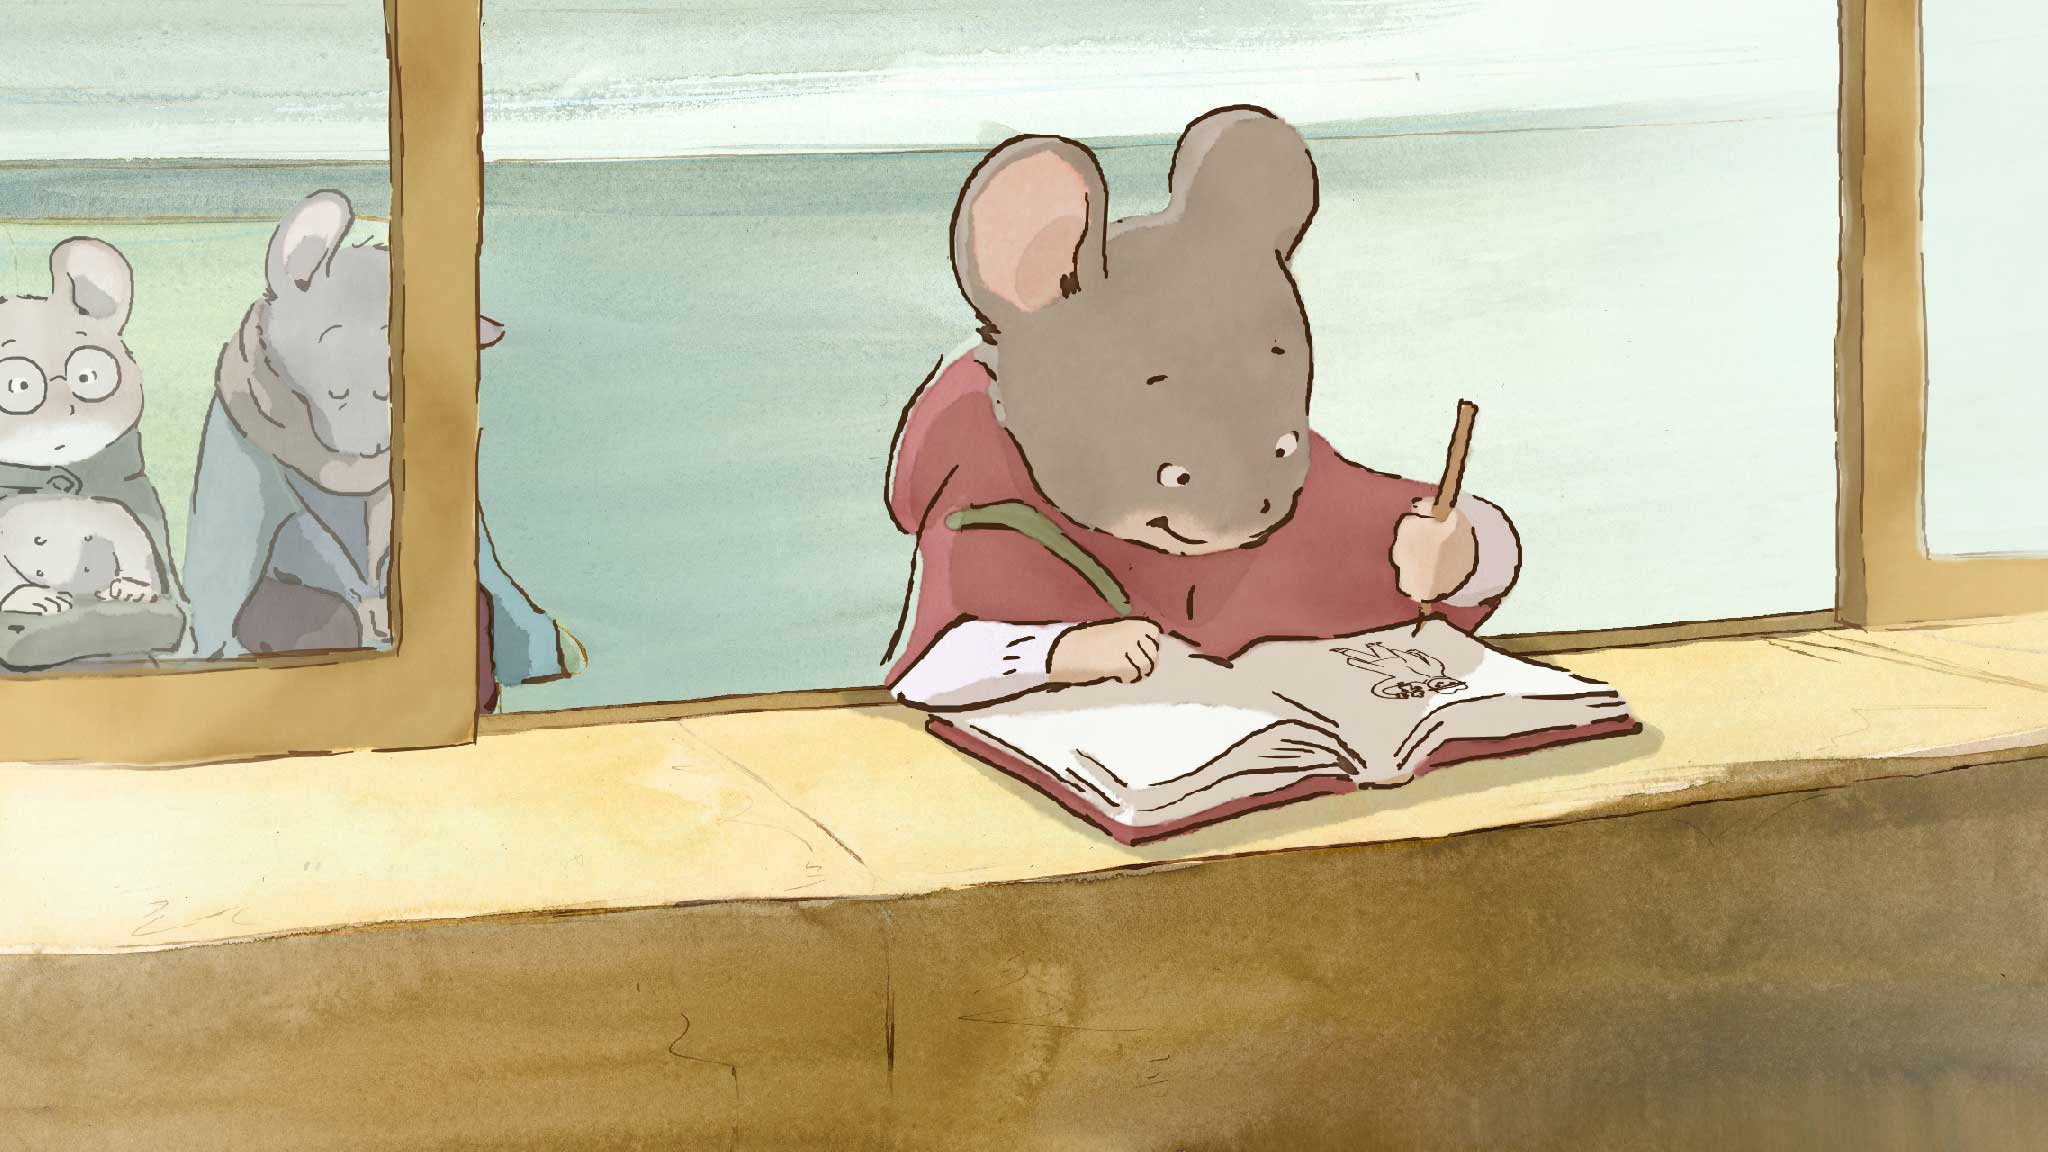 A smiling animated mouse in a red cloak happily draws in a sketchbook balanced on the sill of an open window while other, older mice doze in chairs behind her in Ernest &amp; Celestine